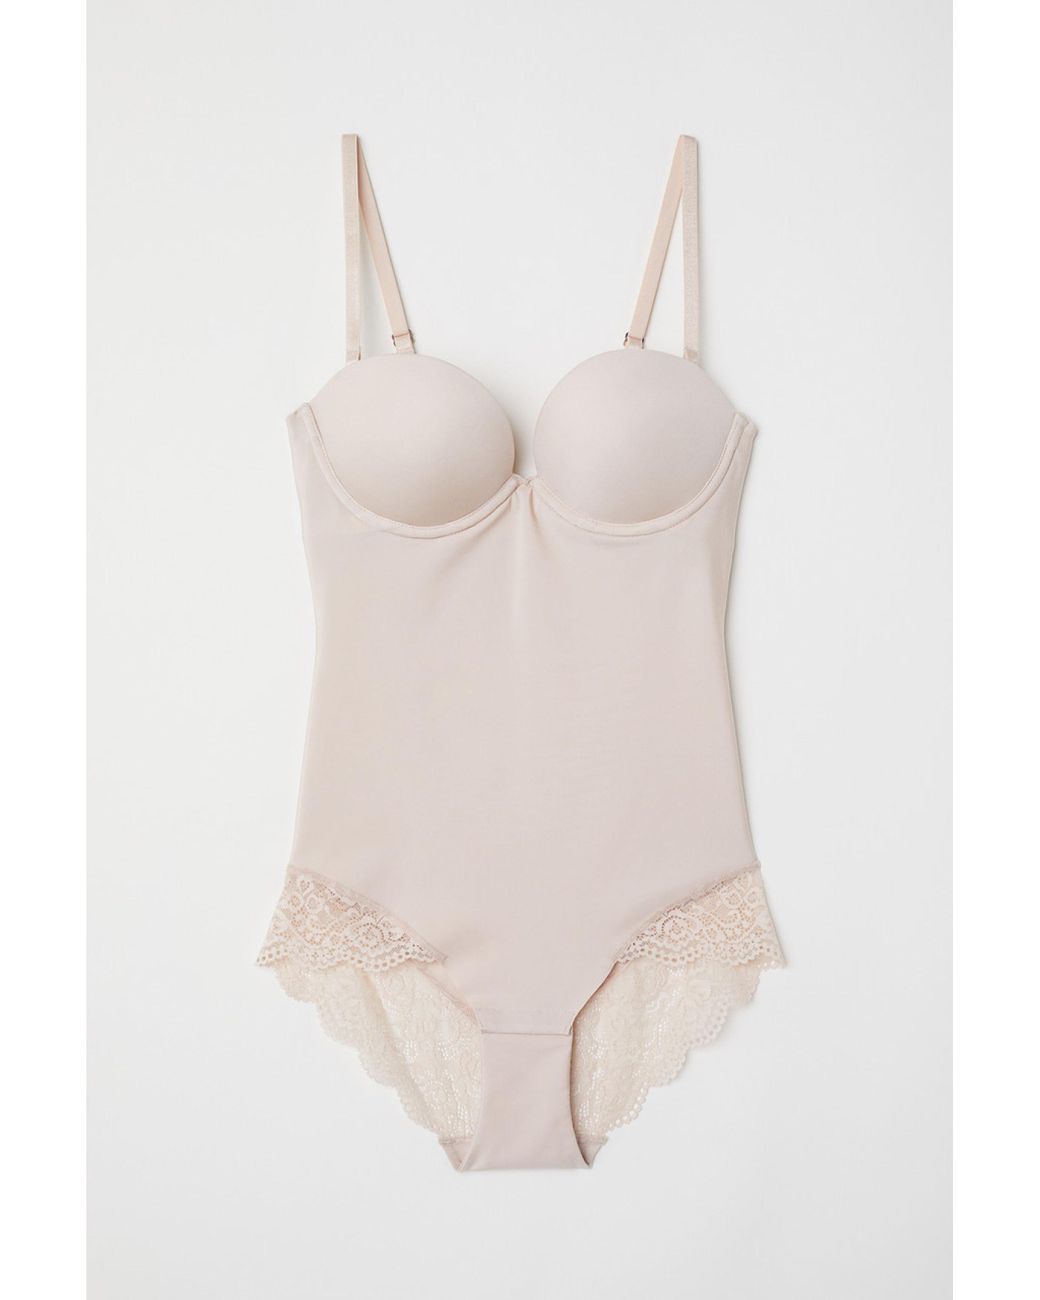 H&M Shaping Super Push-up Bodysuit in Natural | Lyst